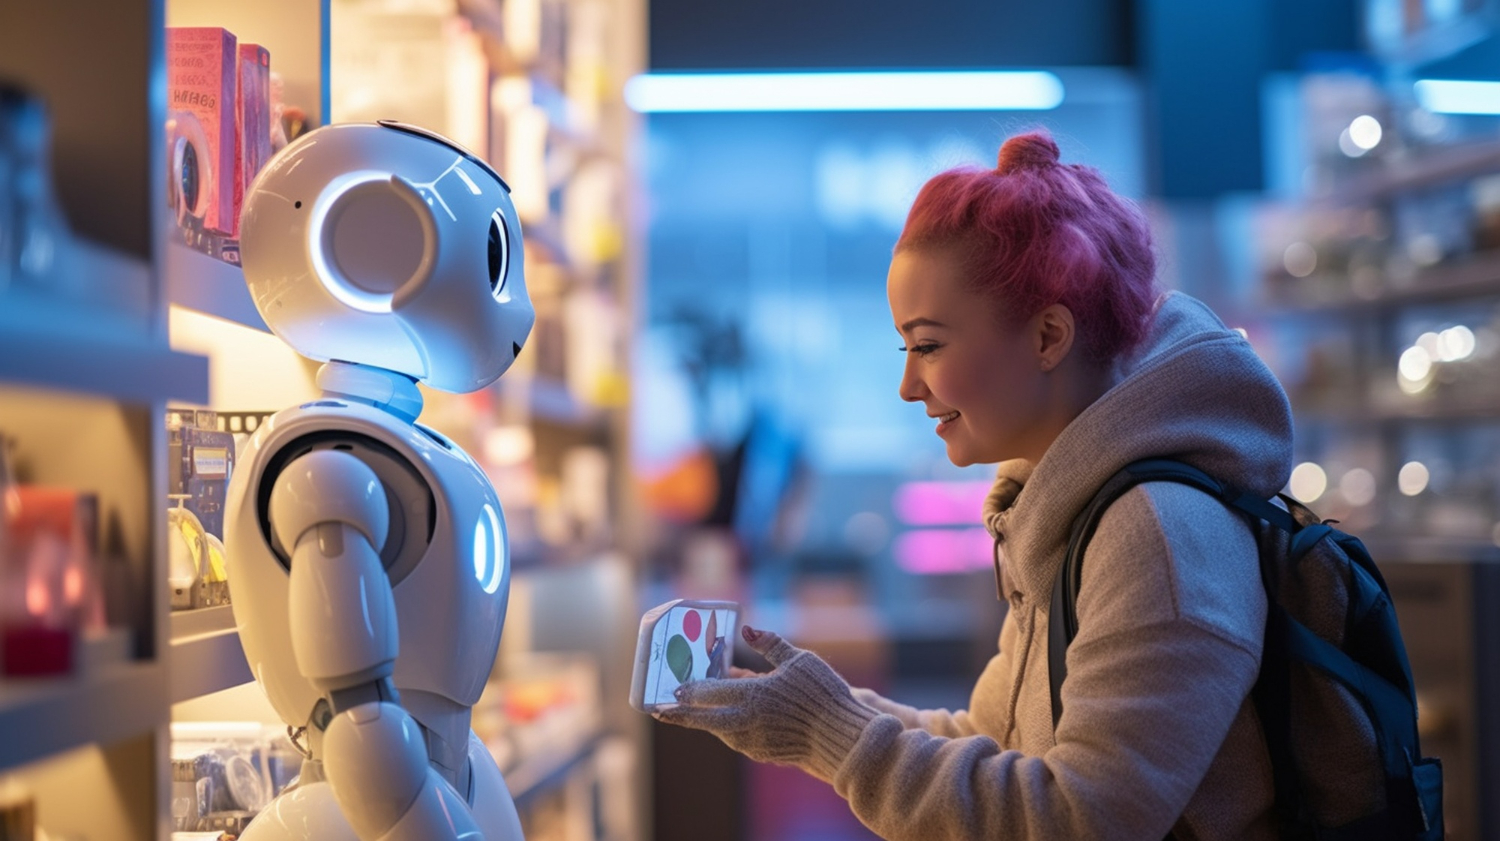 How can AI tools improve customer service and satisfaction?